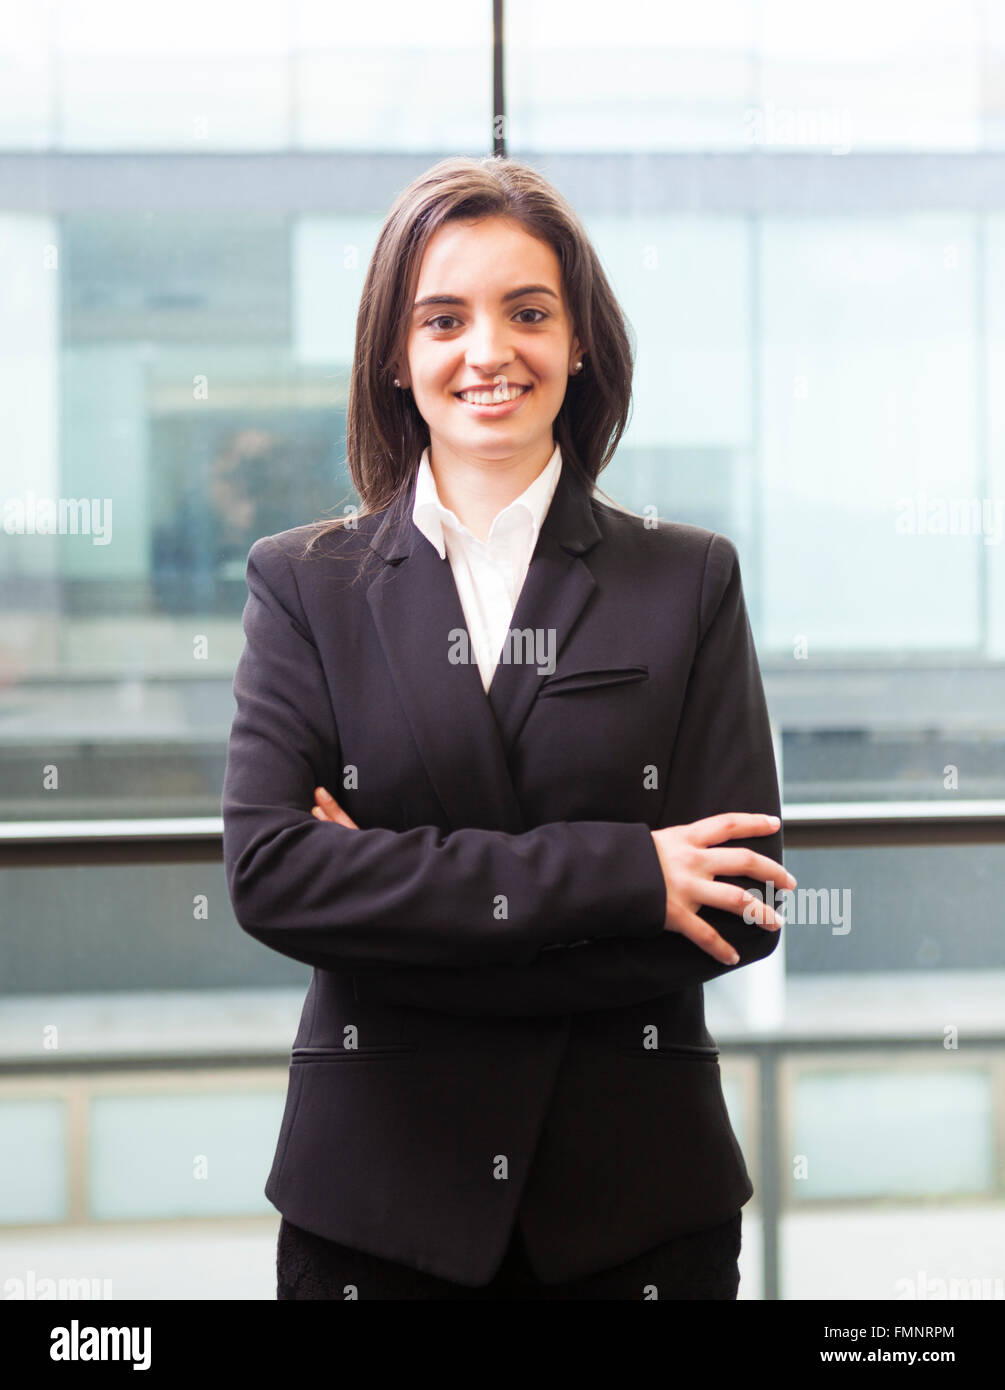 Portrait of a happy smiling young business woman with cross-armed Stock Photo